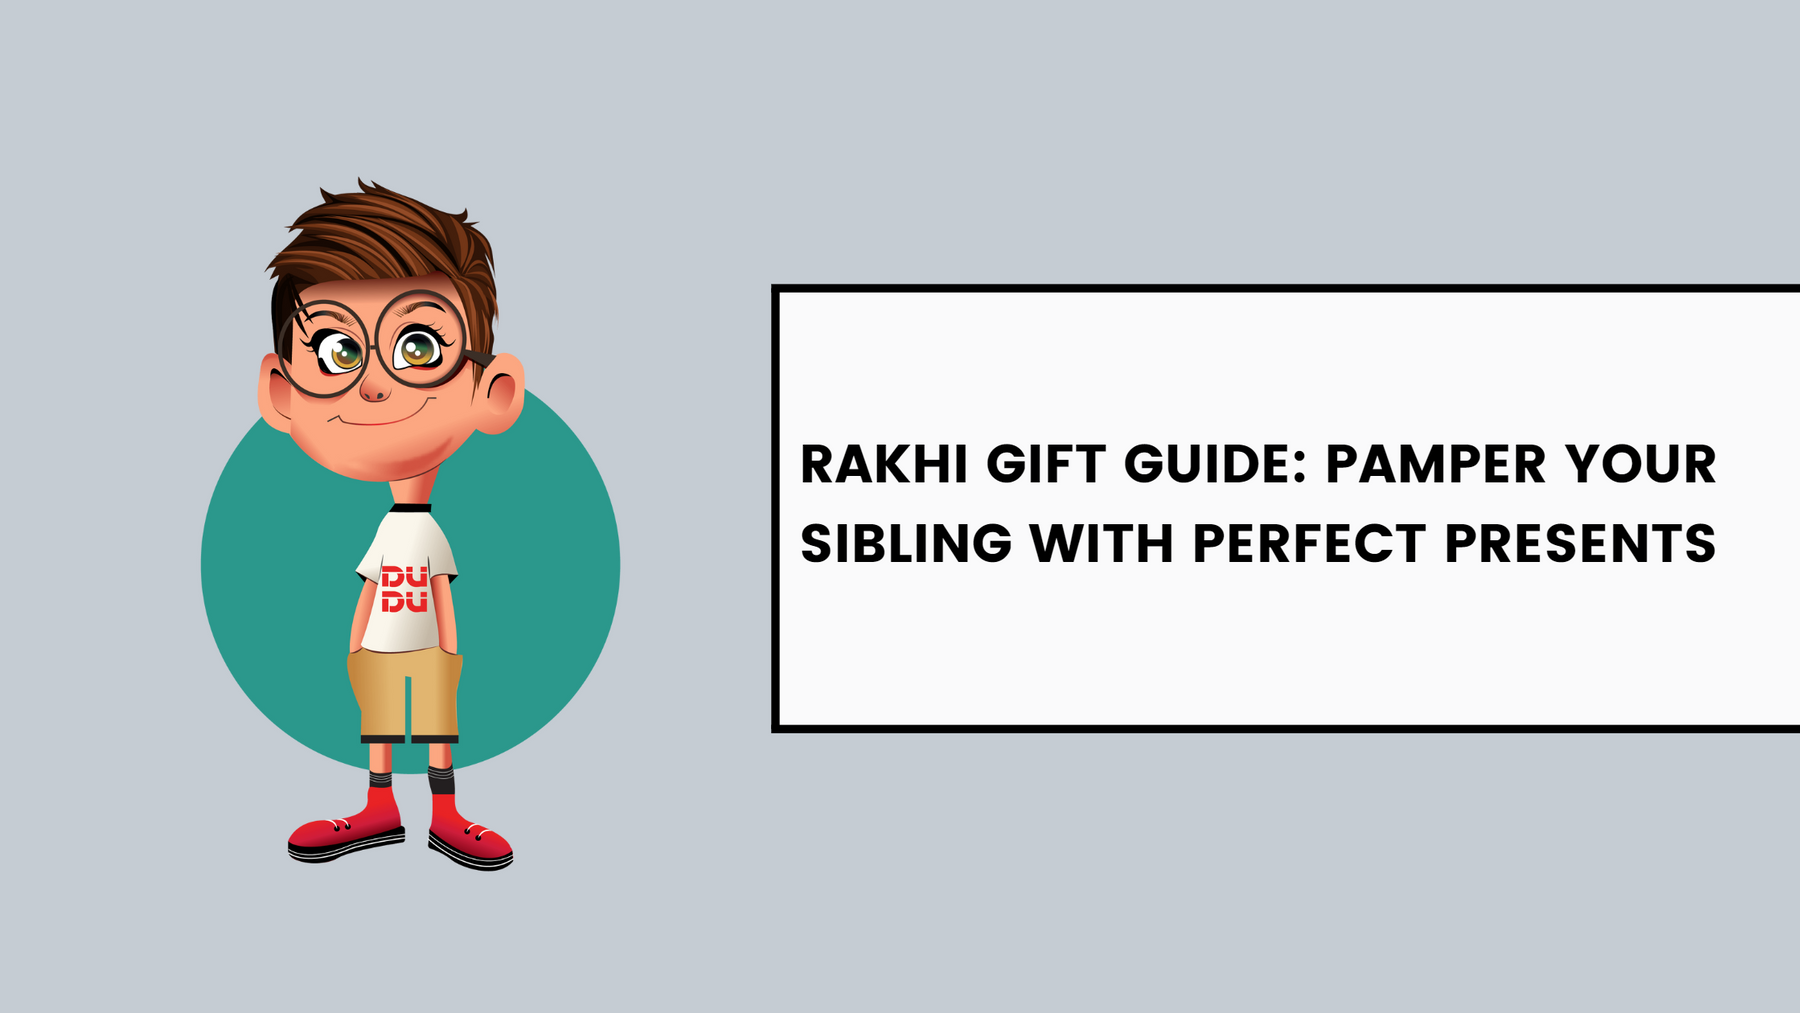 Rakhi Gift Guide: Pamper Your Sibling With Perfect Presents